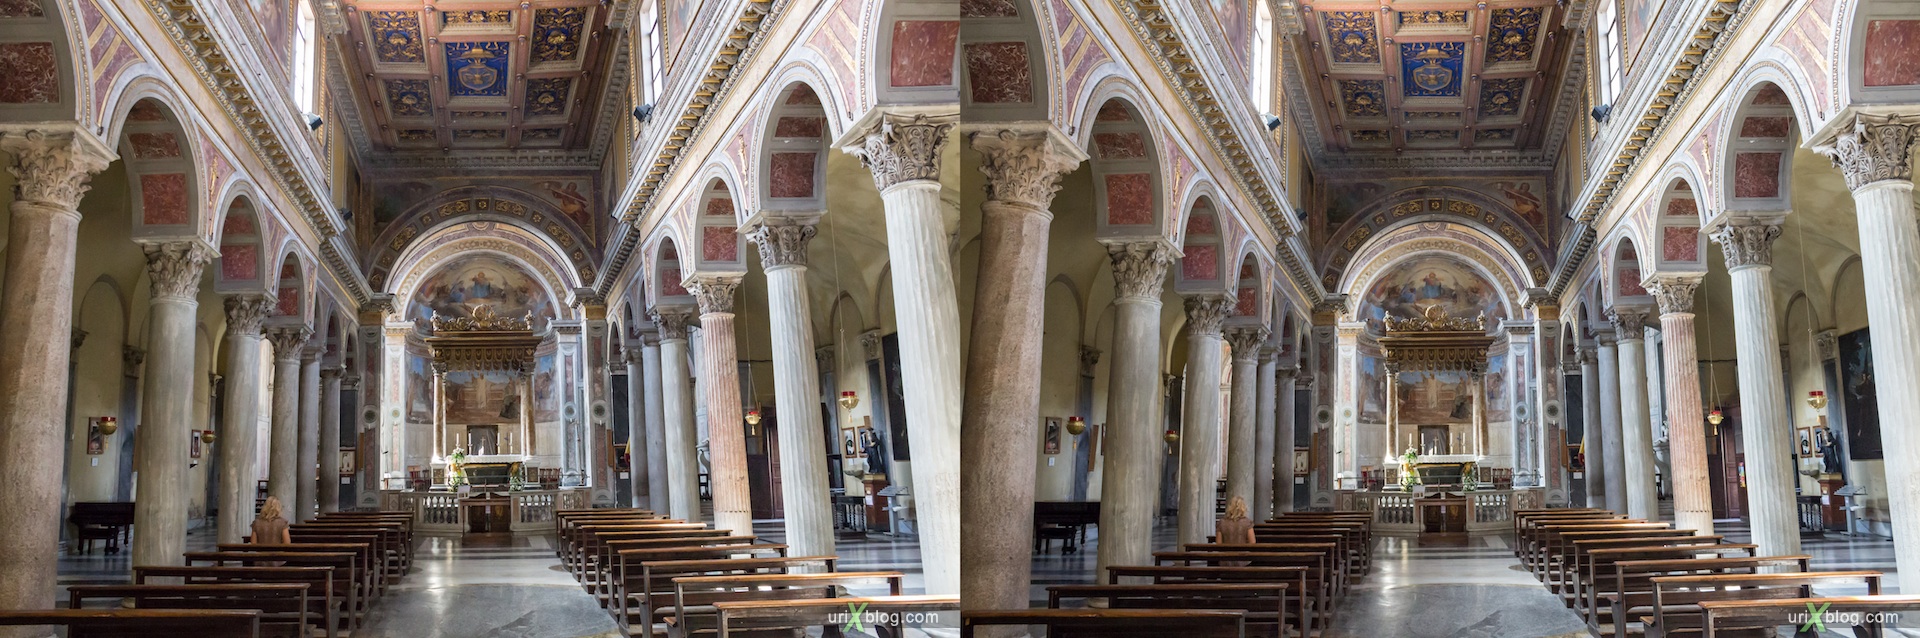 2012, church of San Nicola in Carcere, Rome, Italy, cathedral, monastery, Christianity, Catholicism, 3D, stereo pair, cross-eyed, crossview, cross view stereo pair